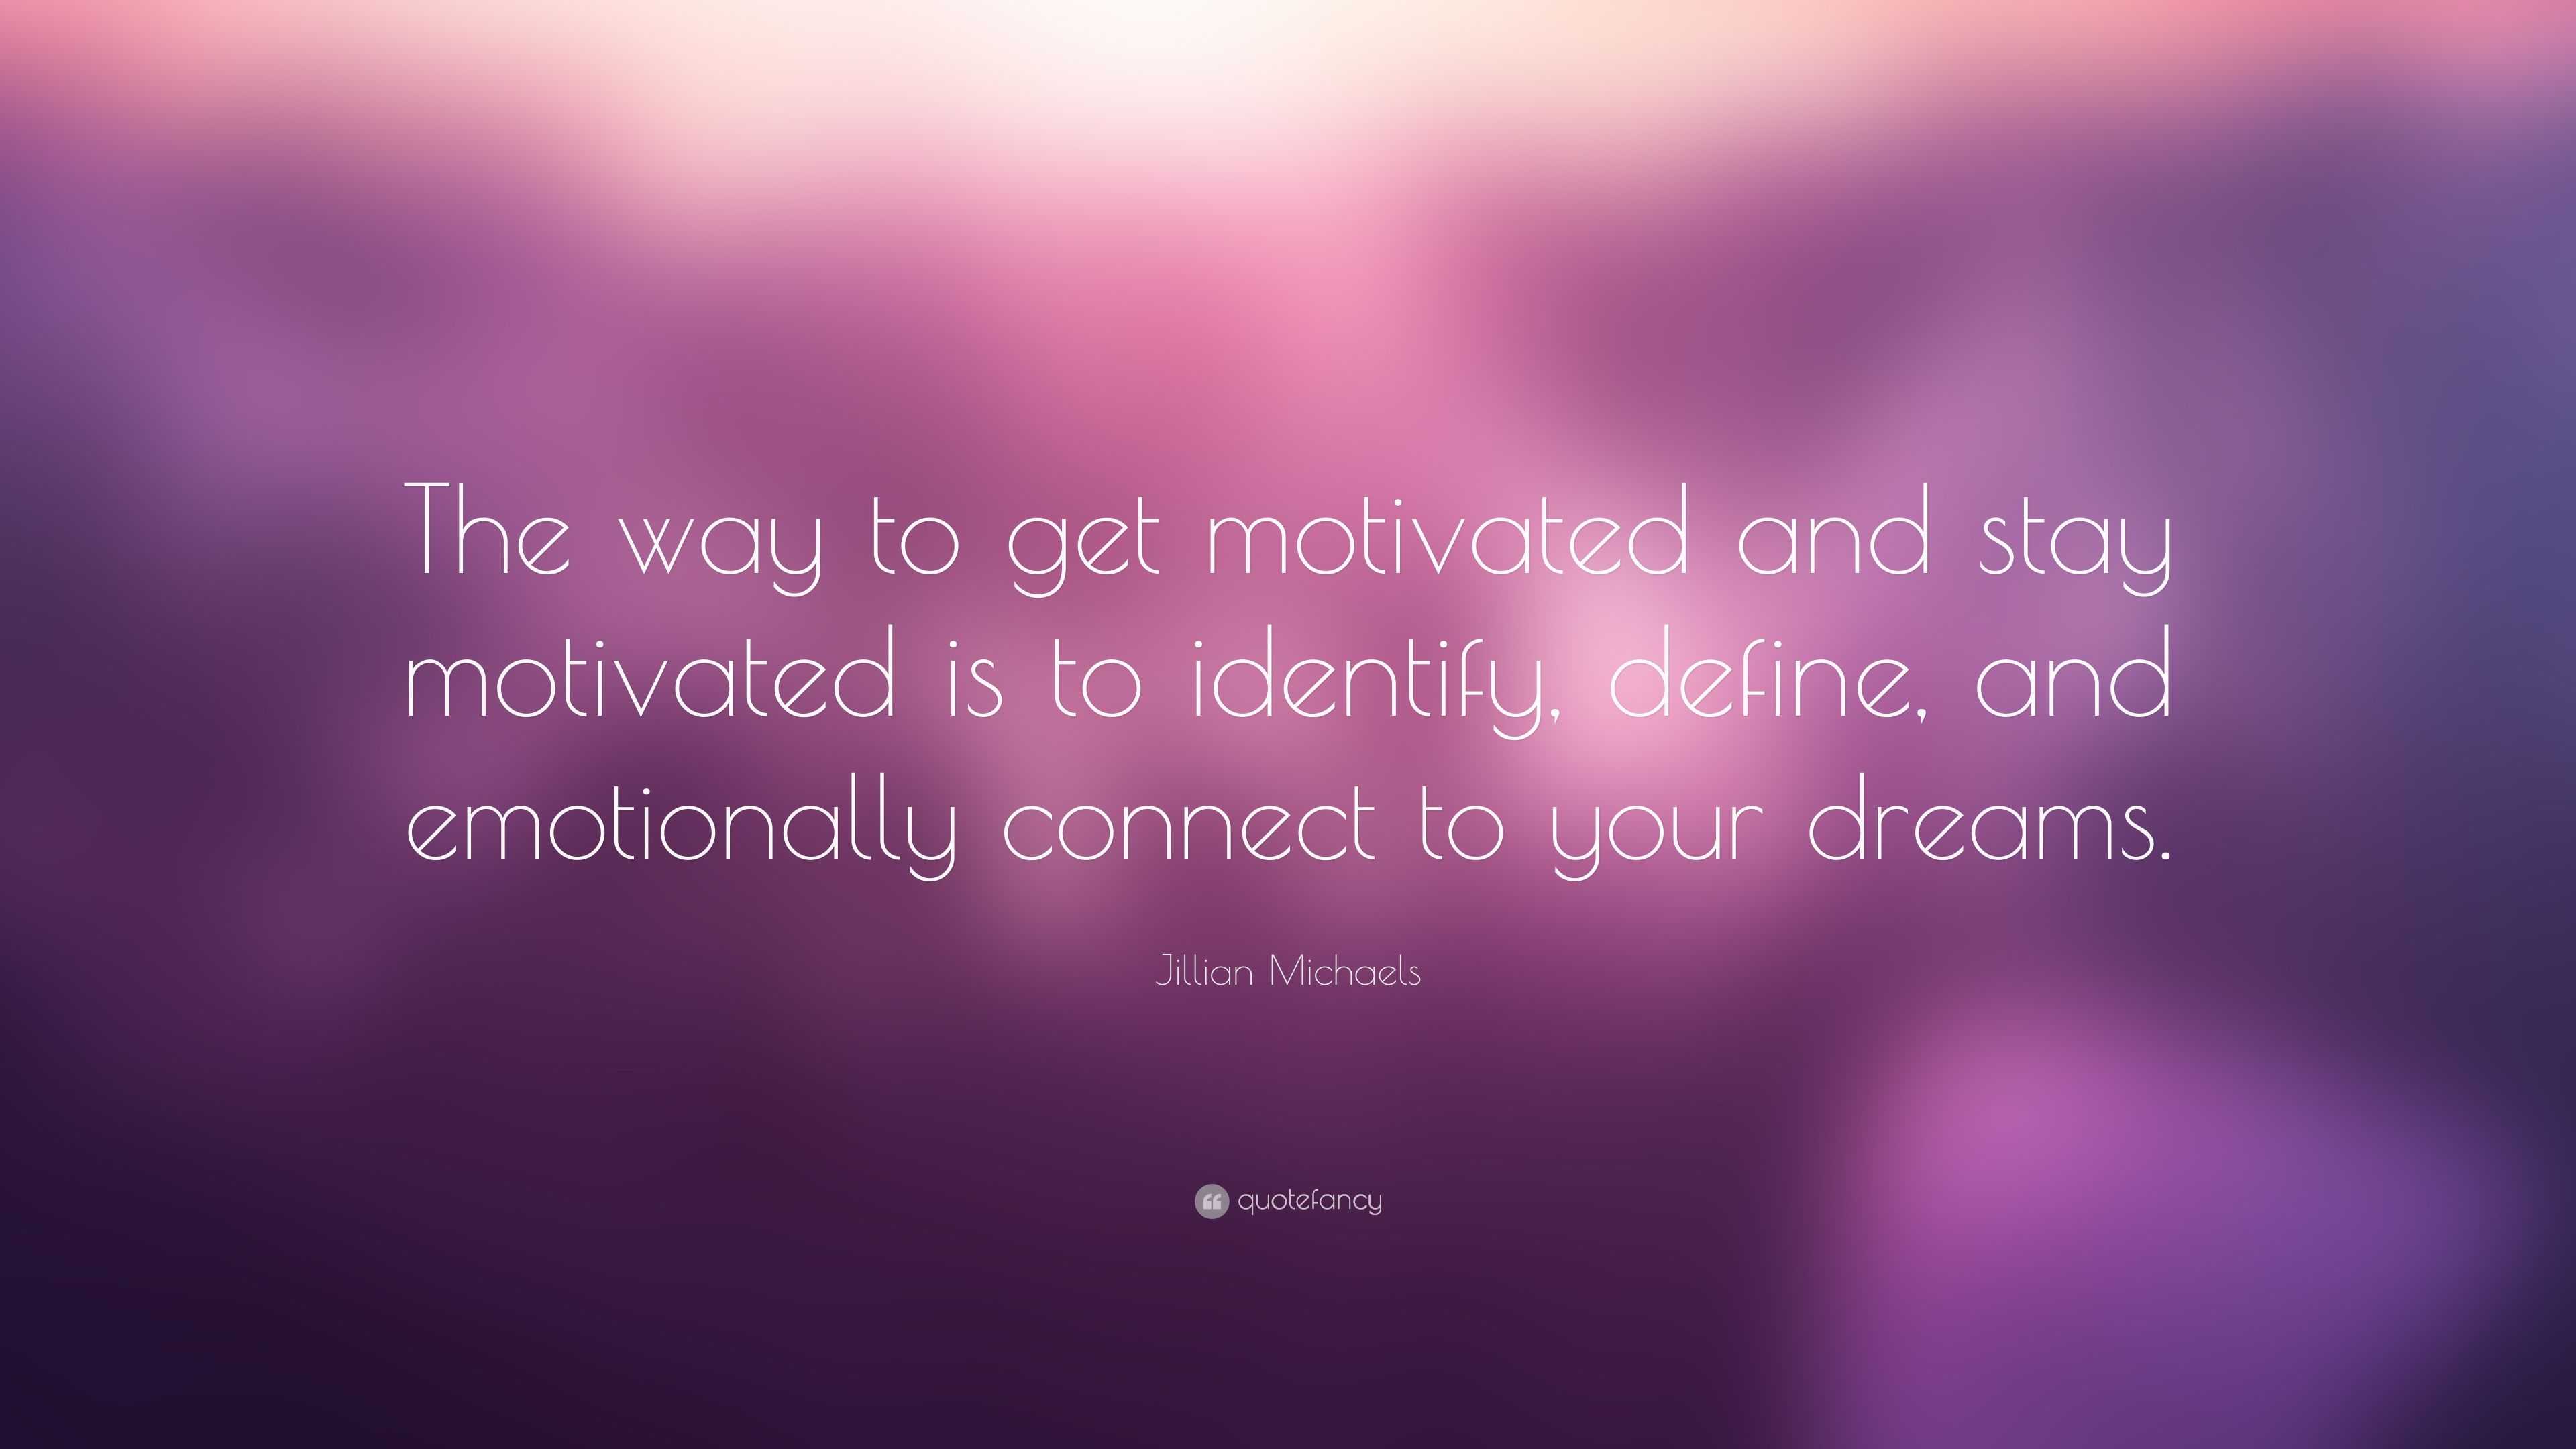 Jillian Michaels Quote: “The way to get motivated and stay motivated is ...